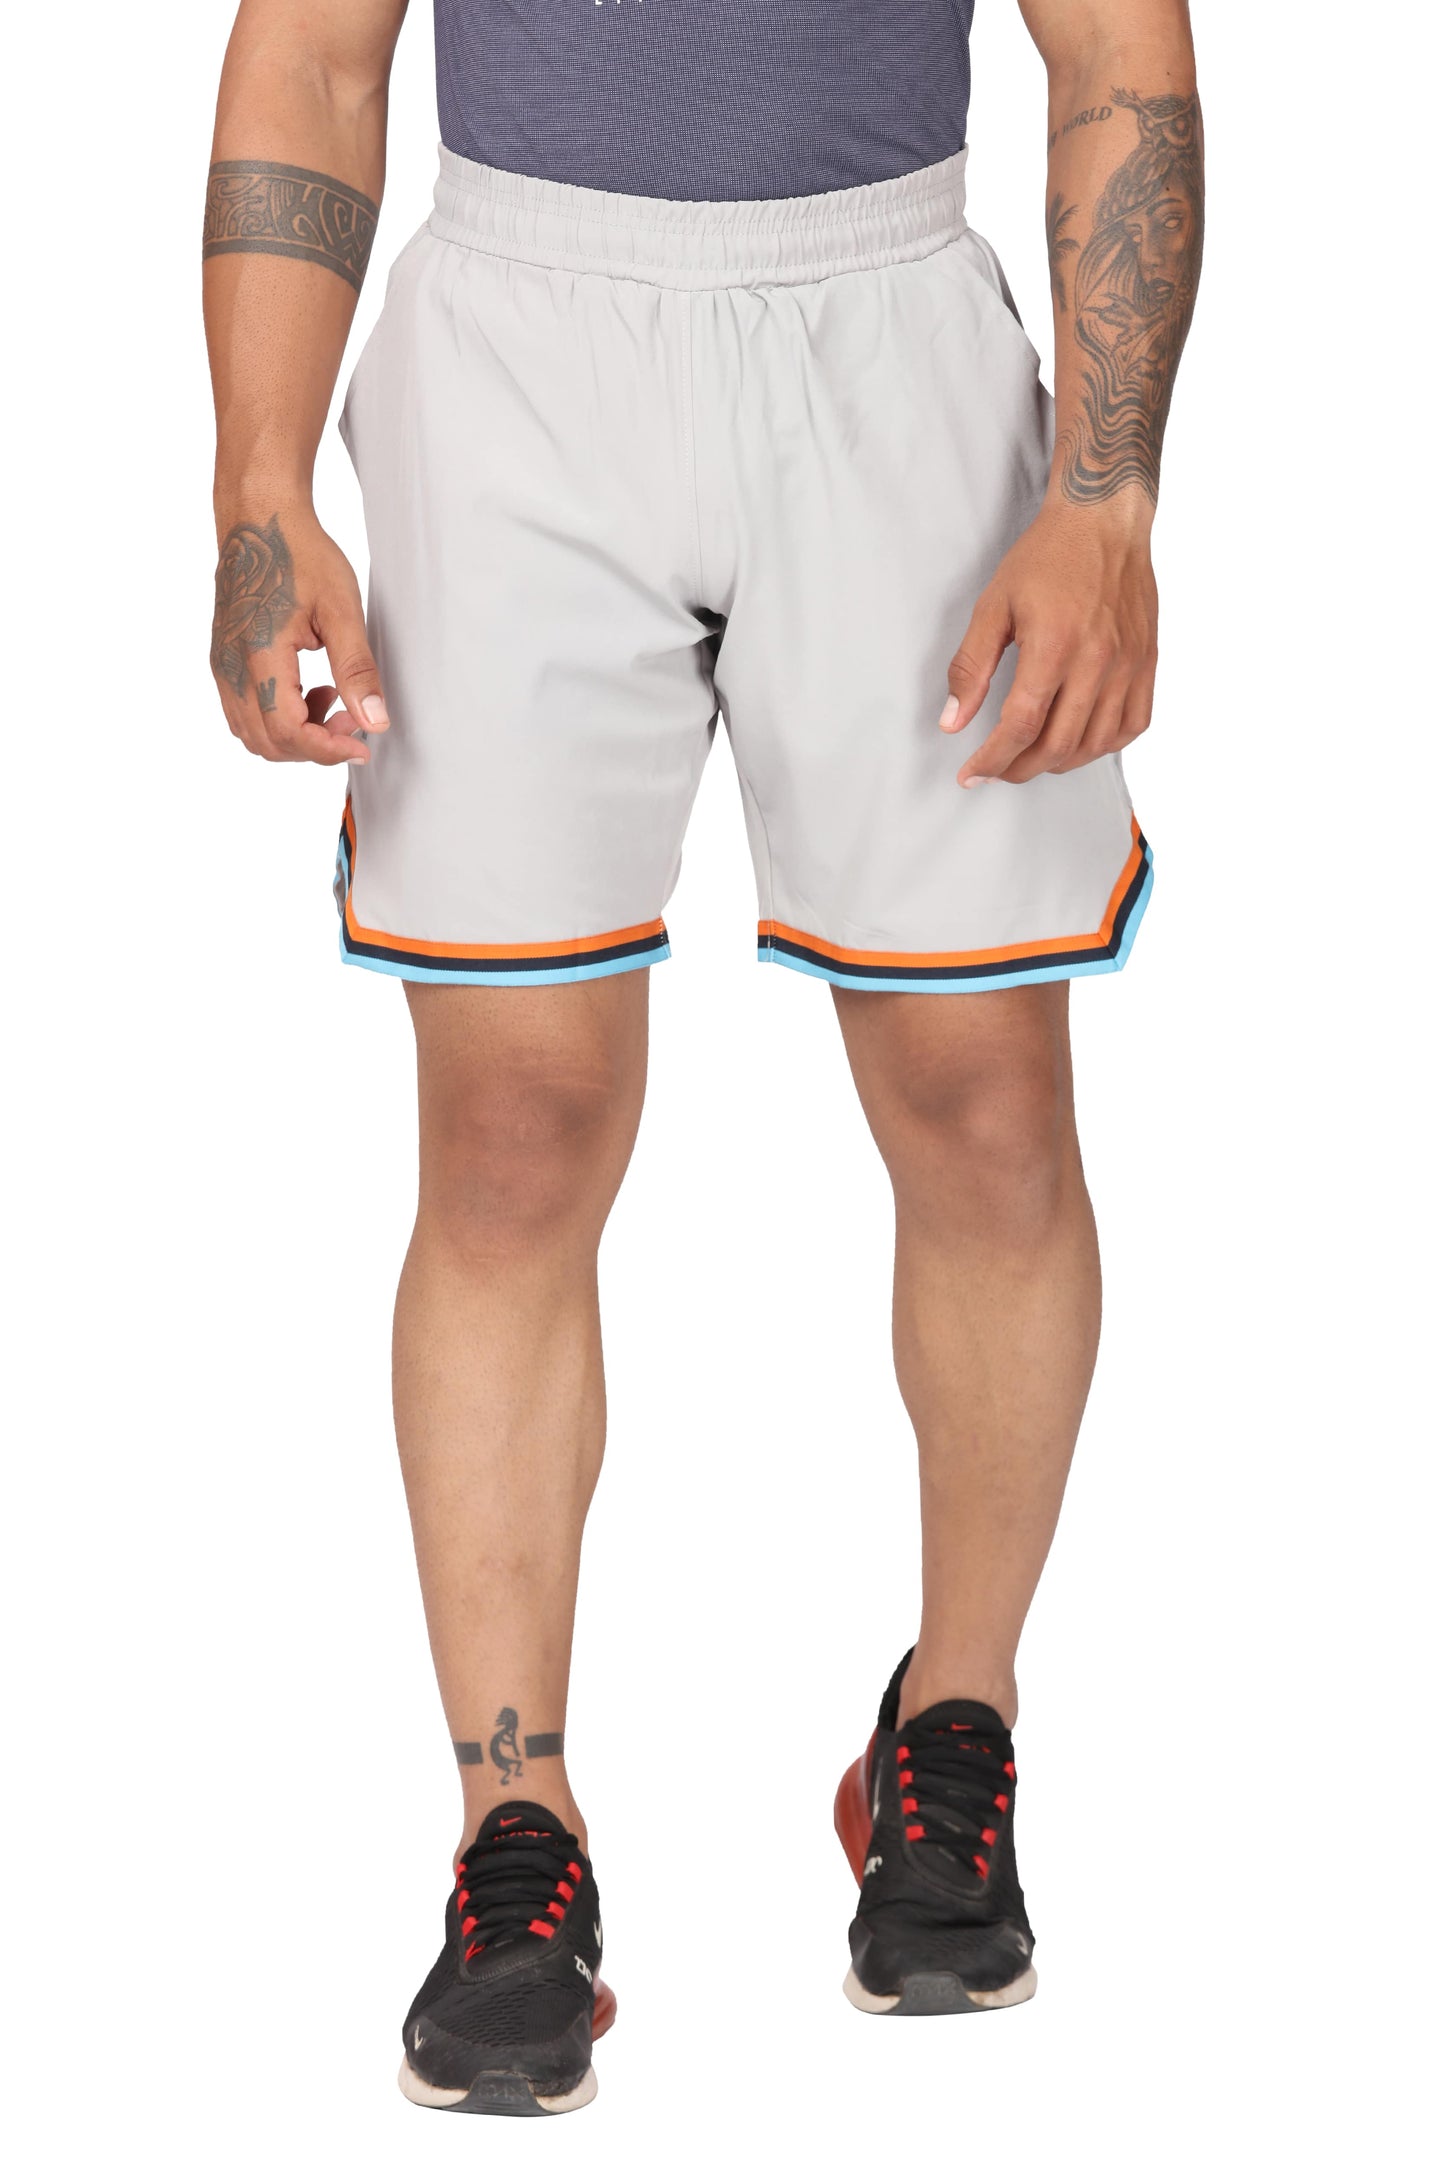 Men's Moisture-wicking and V-cut workout Grey Shorts